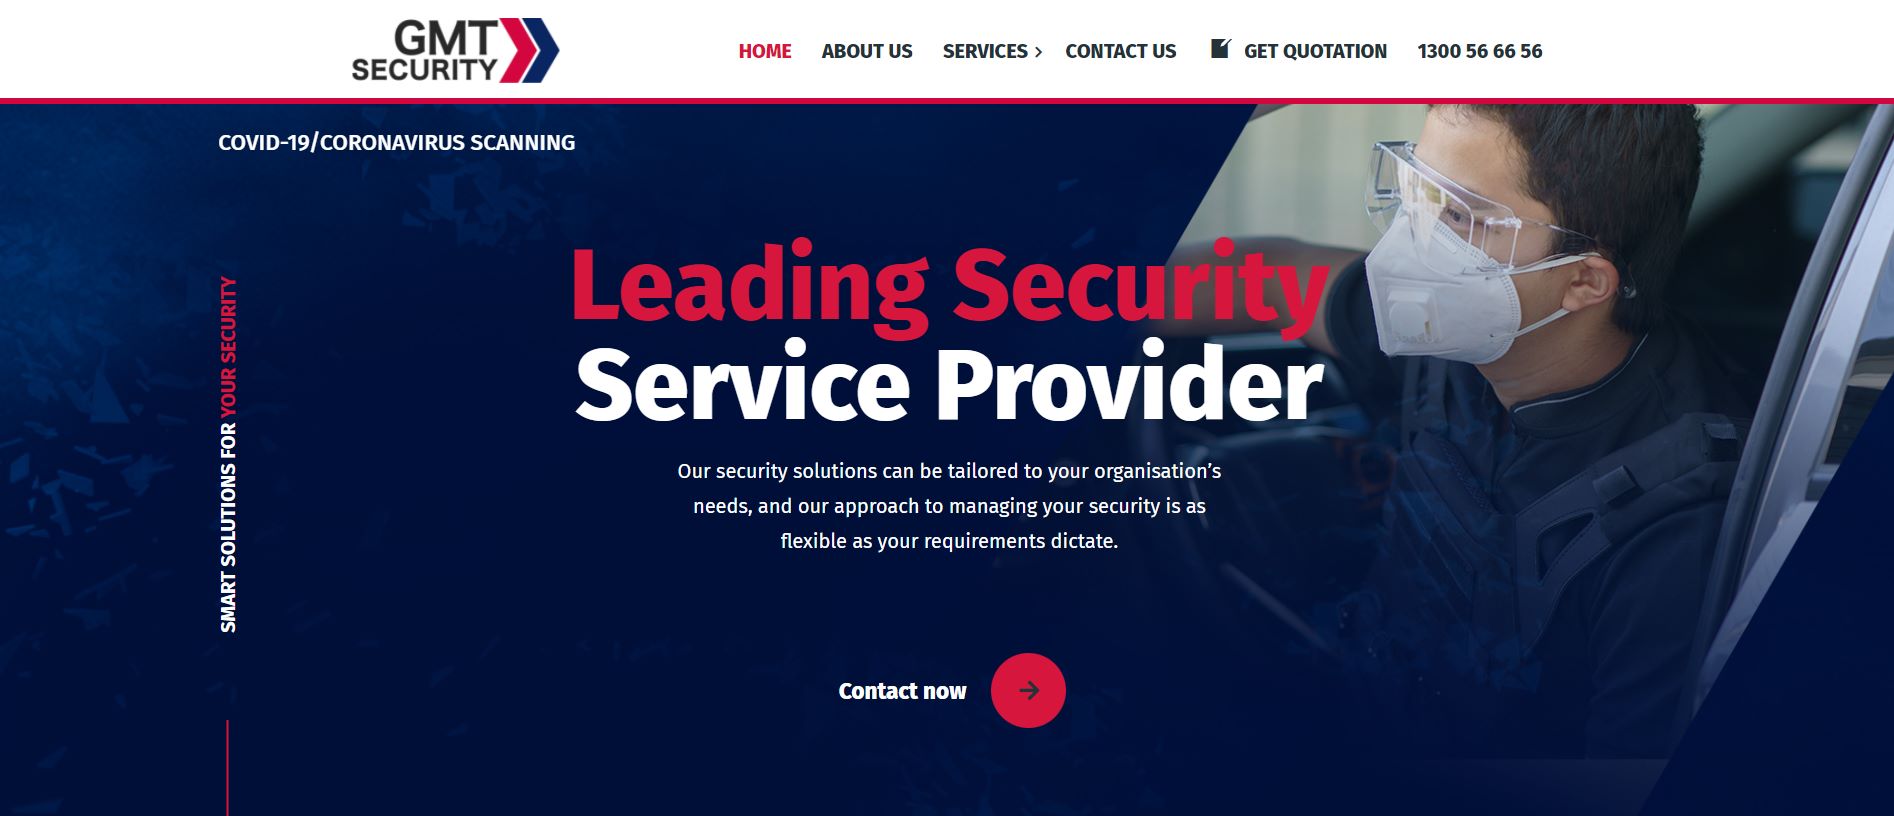 gmt security security guard company sydney